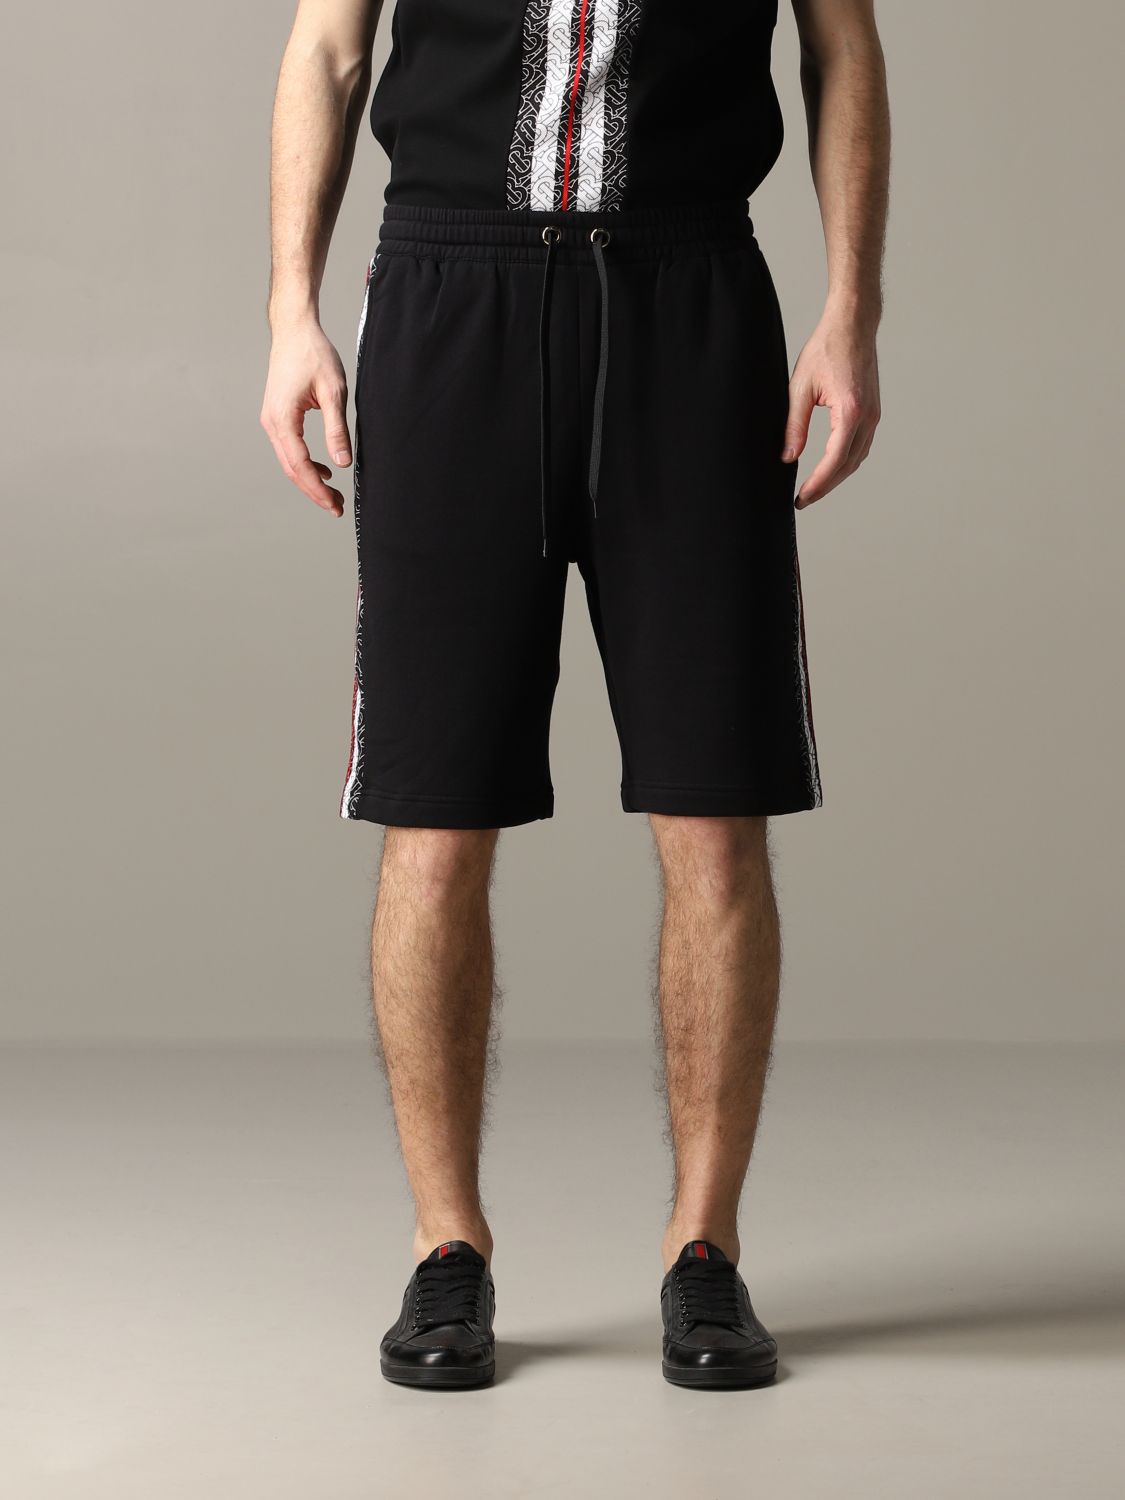 Burberry jogging shorts with tb bands 